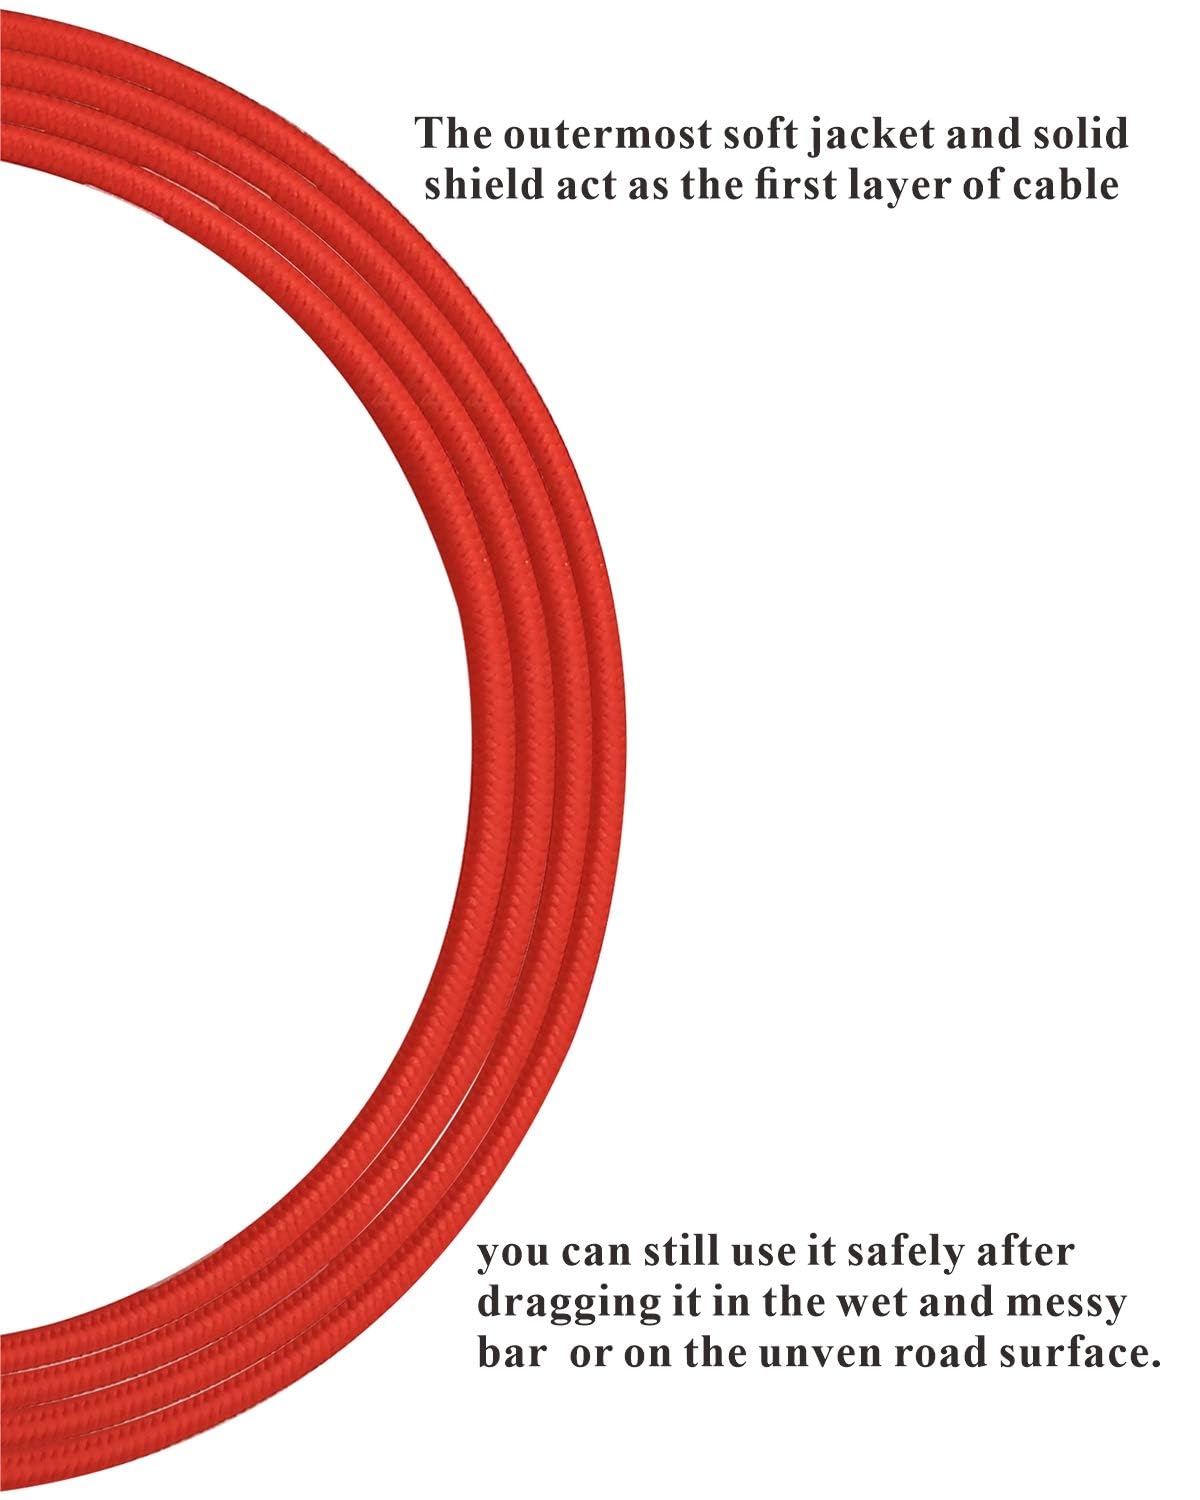 10Feet Professional Guitar Instrument Cable with a red Tweed Coat Angle 1/4 Inch TS to Straight 1/4 Inch TS